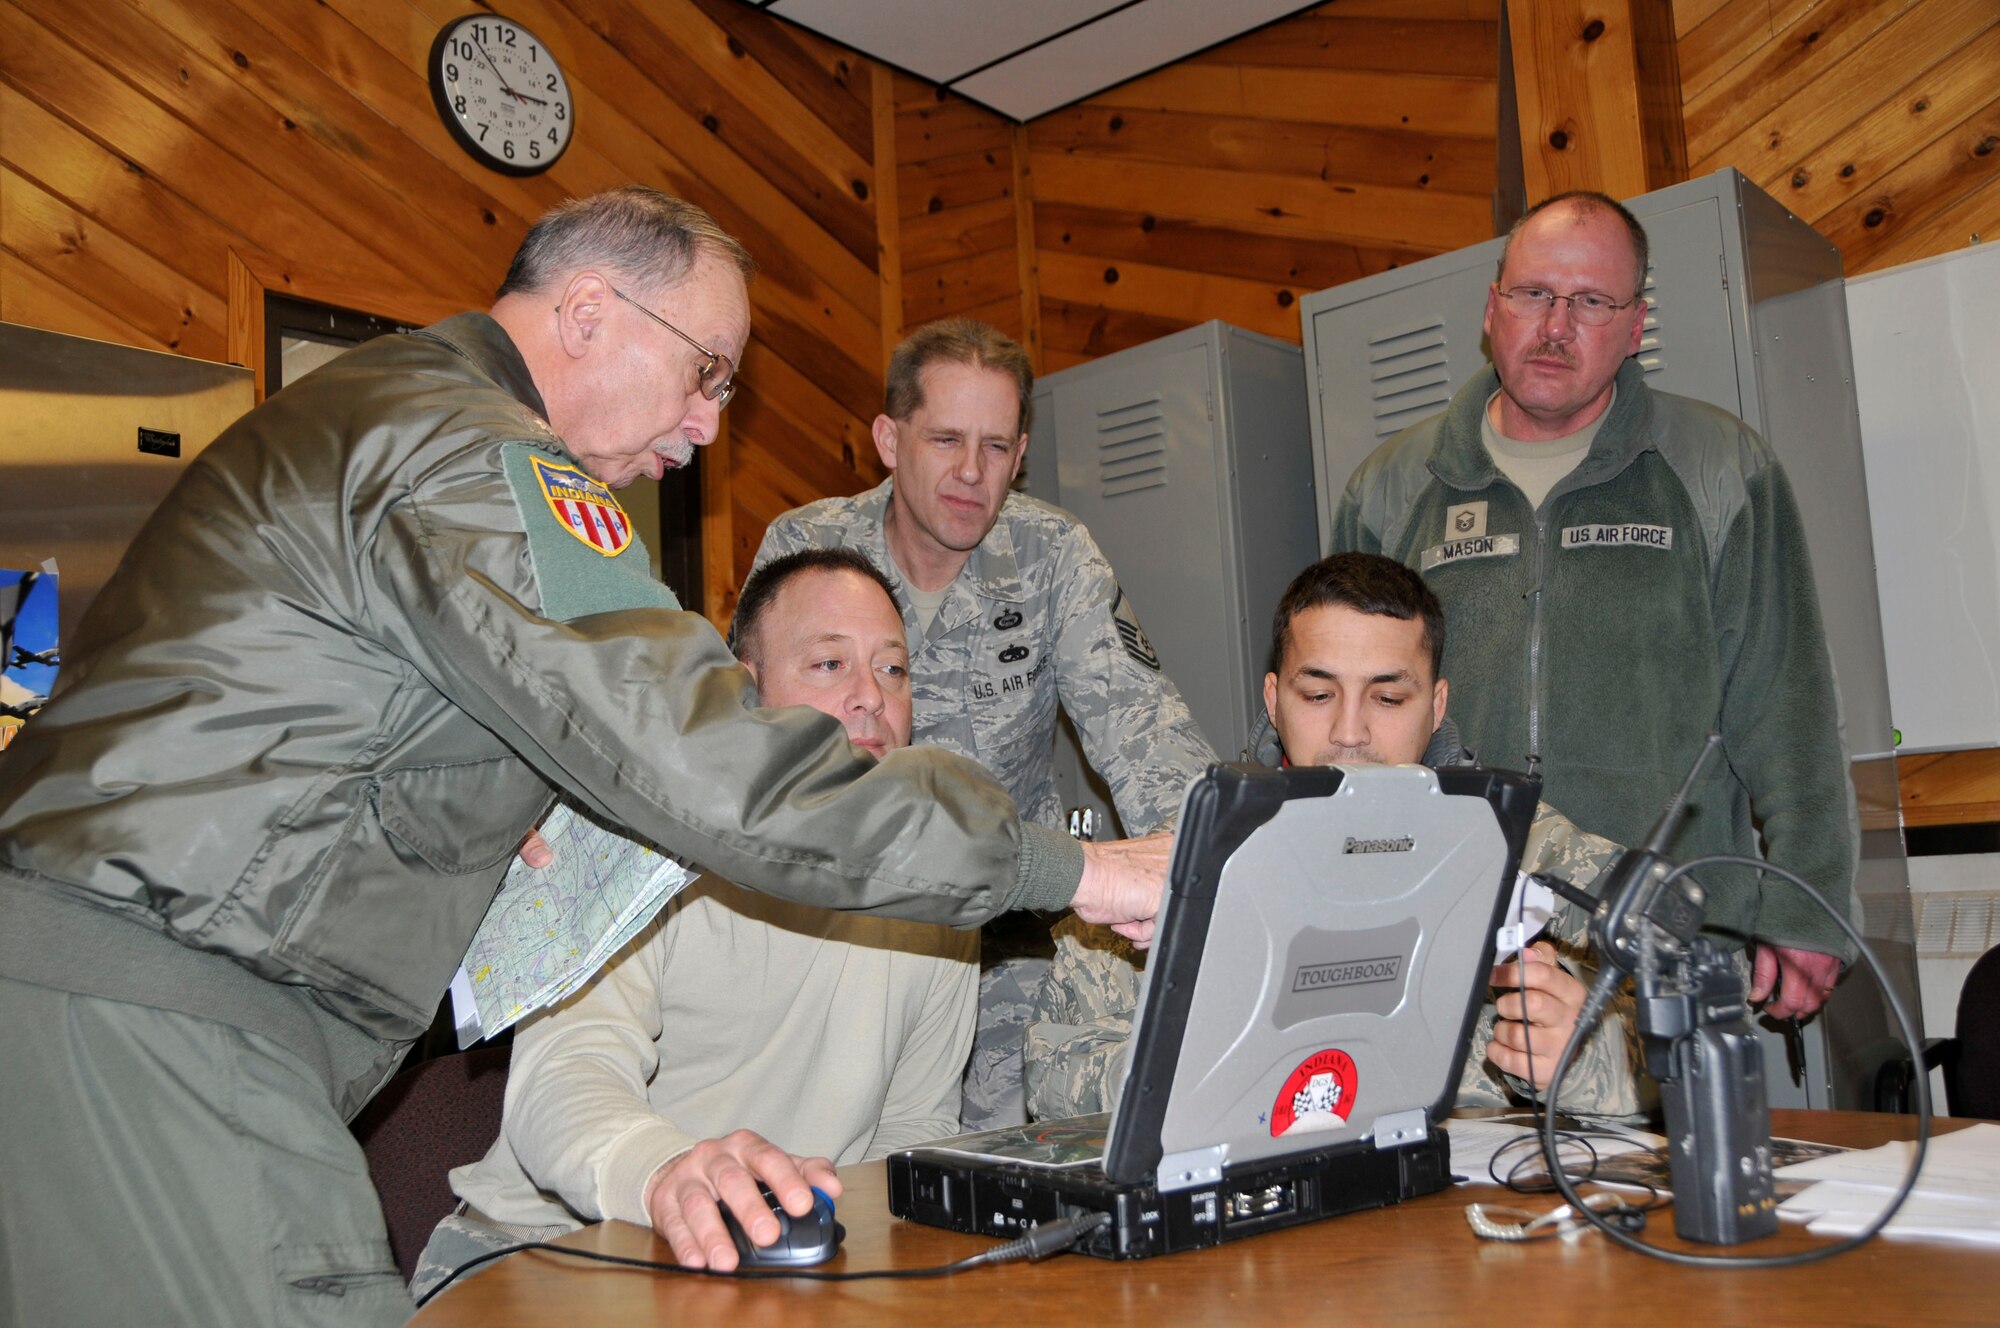 U.S. Air Force airmen assigned to the 181st Intelligence Wing, Indiana Air National Guard and Lt. Col. Reginald H. Paul, Civil Air Patrol pilot, conduct pre-mission planning prior to the Operation Blue Ridge Incident Analysis and Assessment mission over the central Indiana Feb. 21, 2014. The 181st IW deployed an Aerial Collections Team to conduct aerial assessment of flooding in Tippecanoe and Fulton Counties in order to provide Indiana Department of Homeland Security with an accurate assessment of flooding.  The 181st Intelligence Wing is crucial to State domestic response. (U.S. Air National Guard photo by Senior Master Sgt. John S. Chapman/Released)